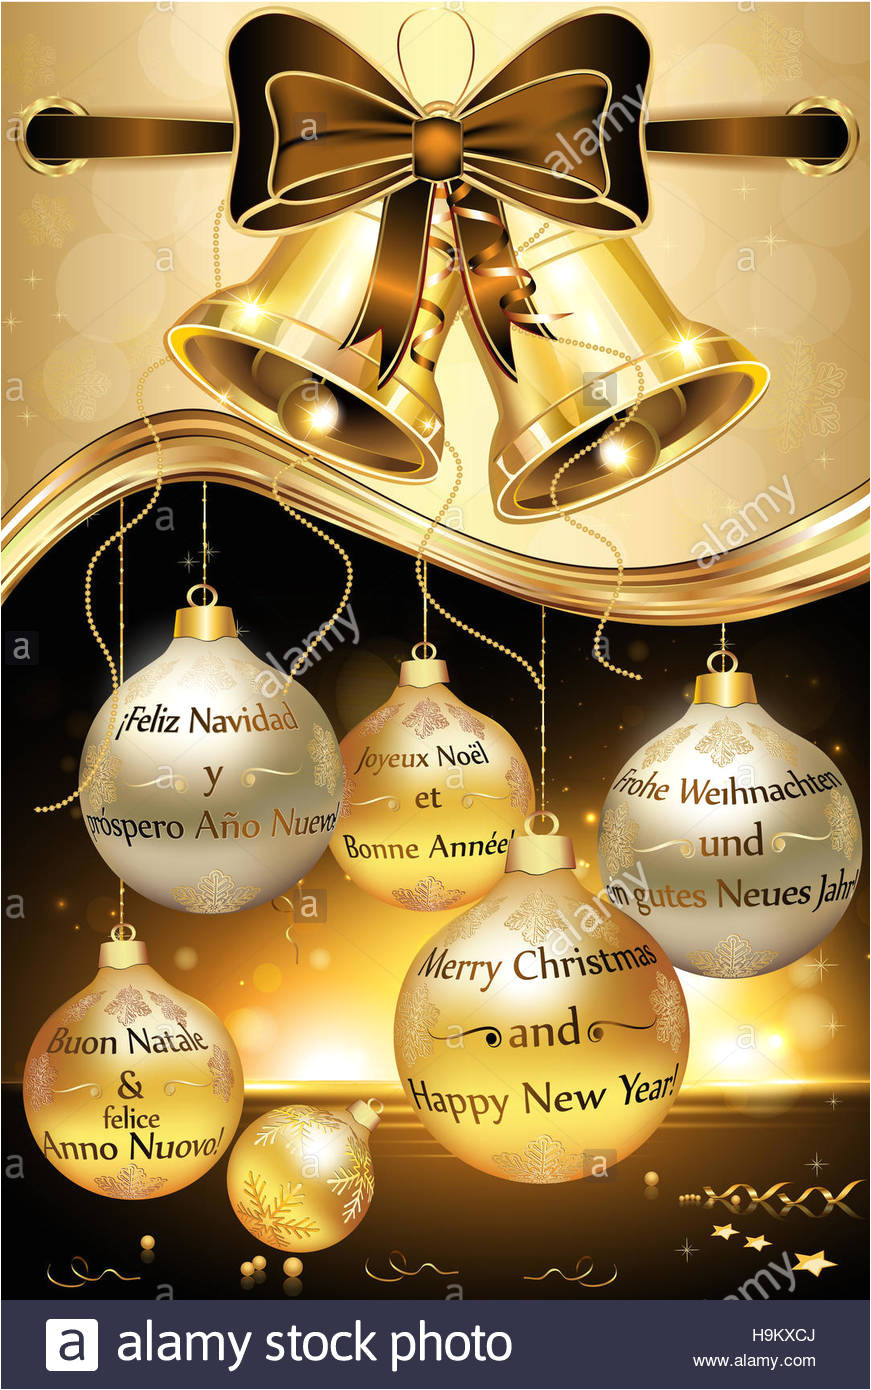 greeting card for new year with message in many languages english h9kxcj jpg